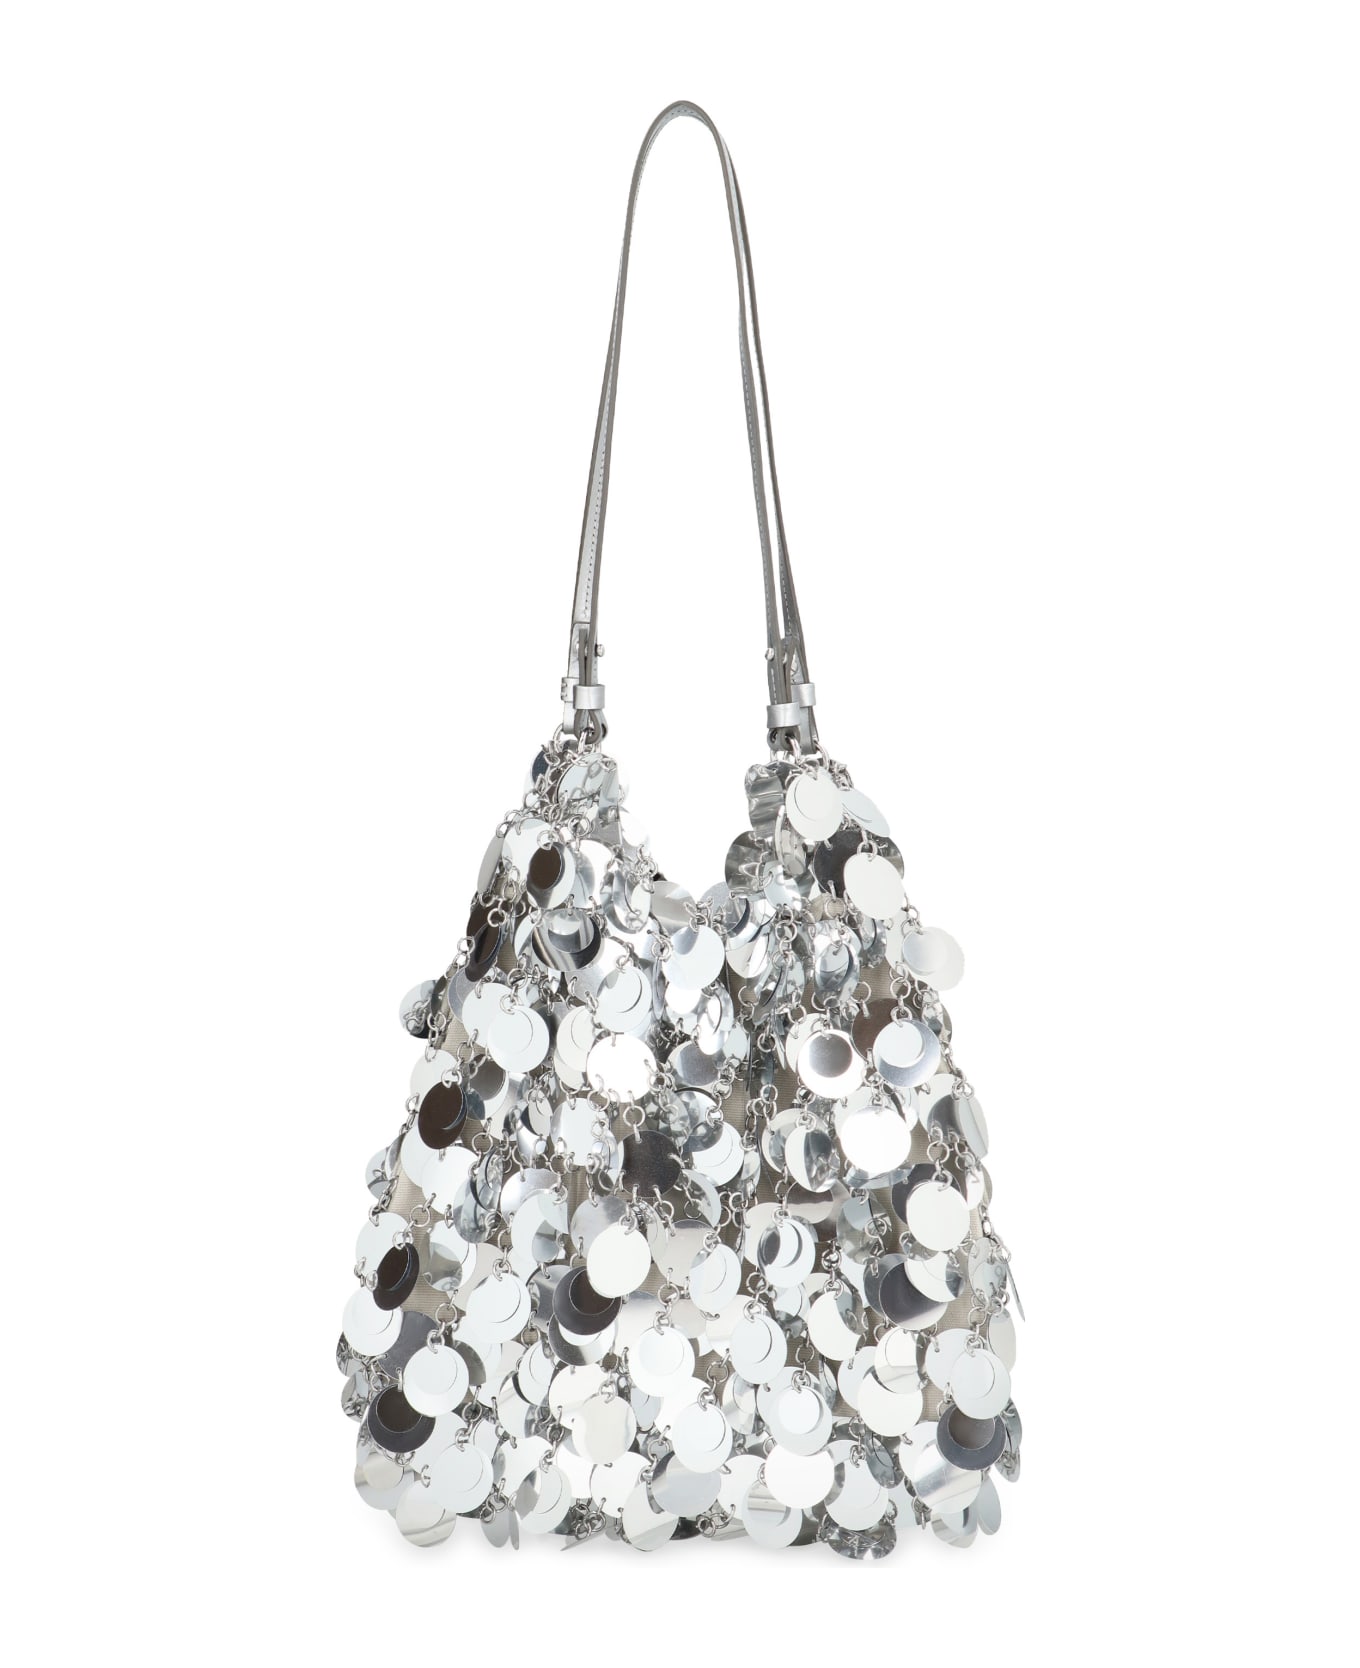 Paco Rabanne Sparkles Tote Bag - Silver トートバッグ